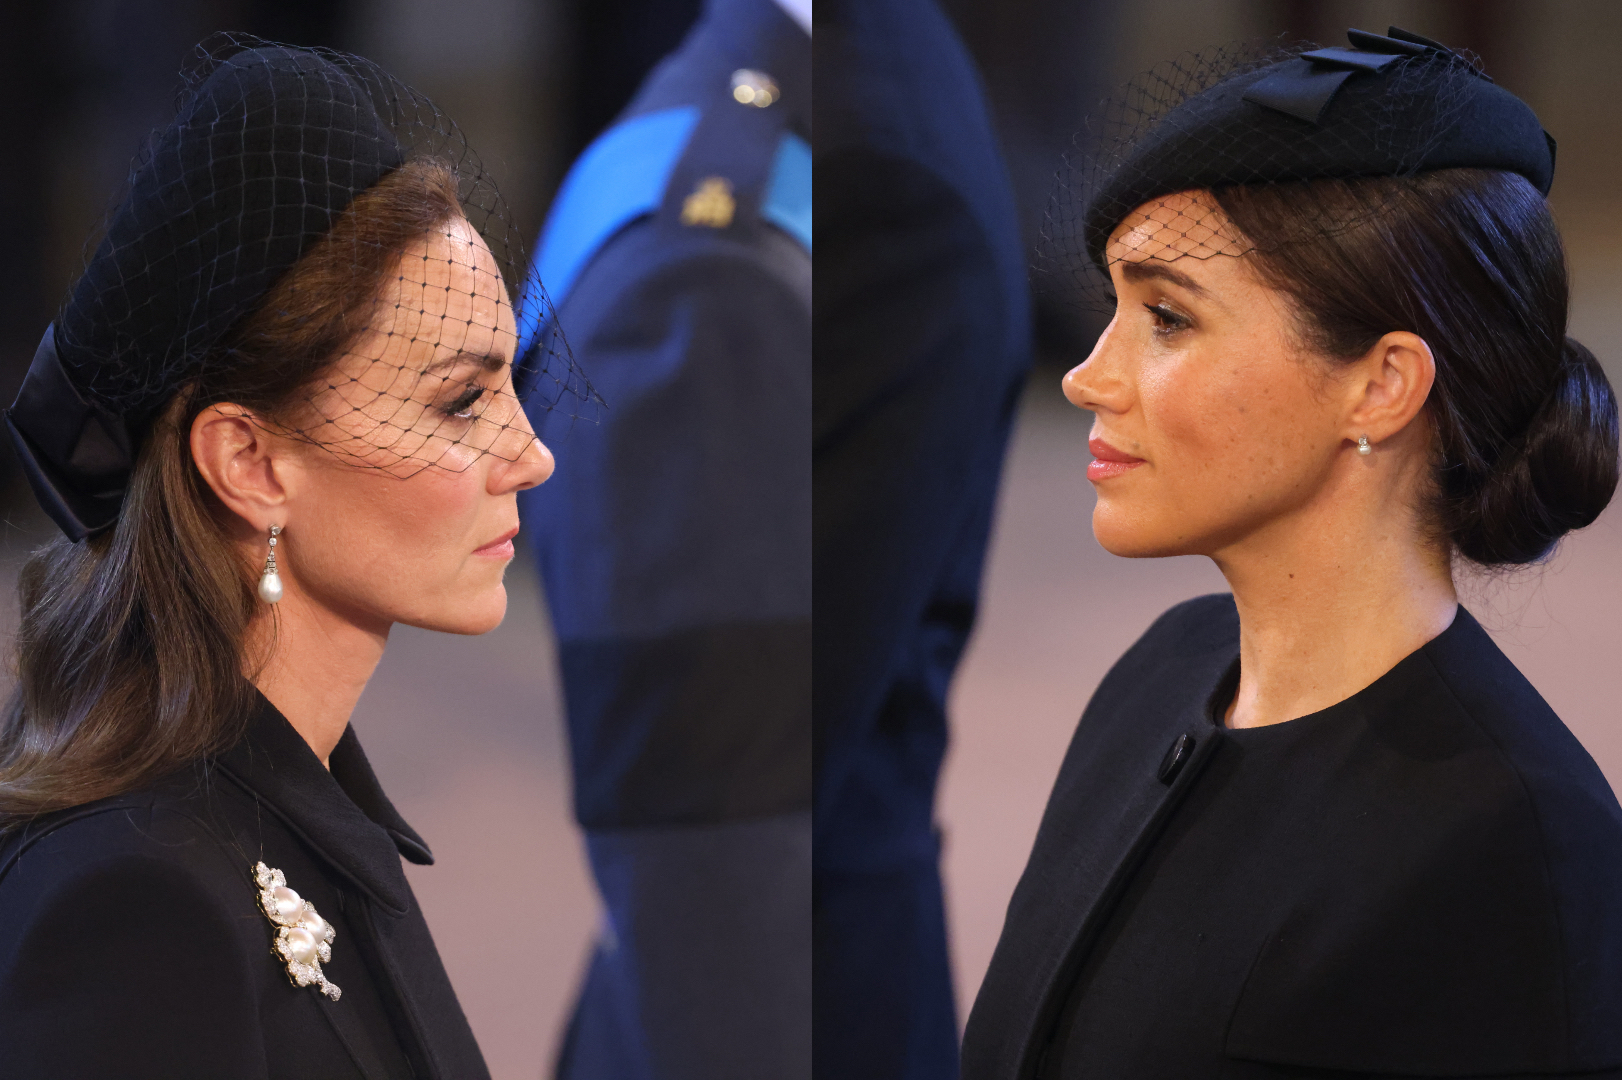 “Kate and Meghan are being pitted against each other” – How Netflix’s docuseries are knocking on the door

+2023